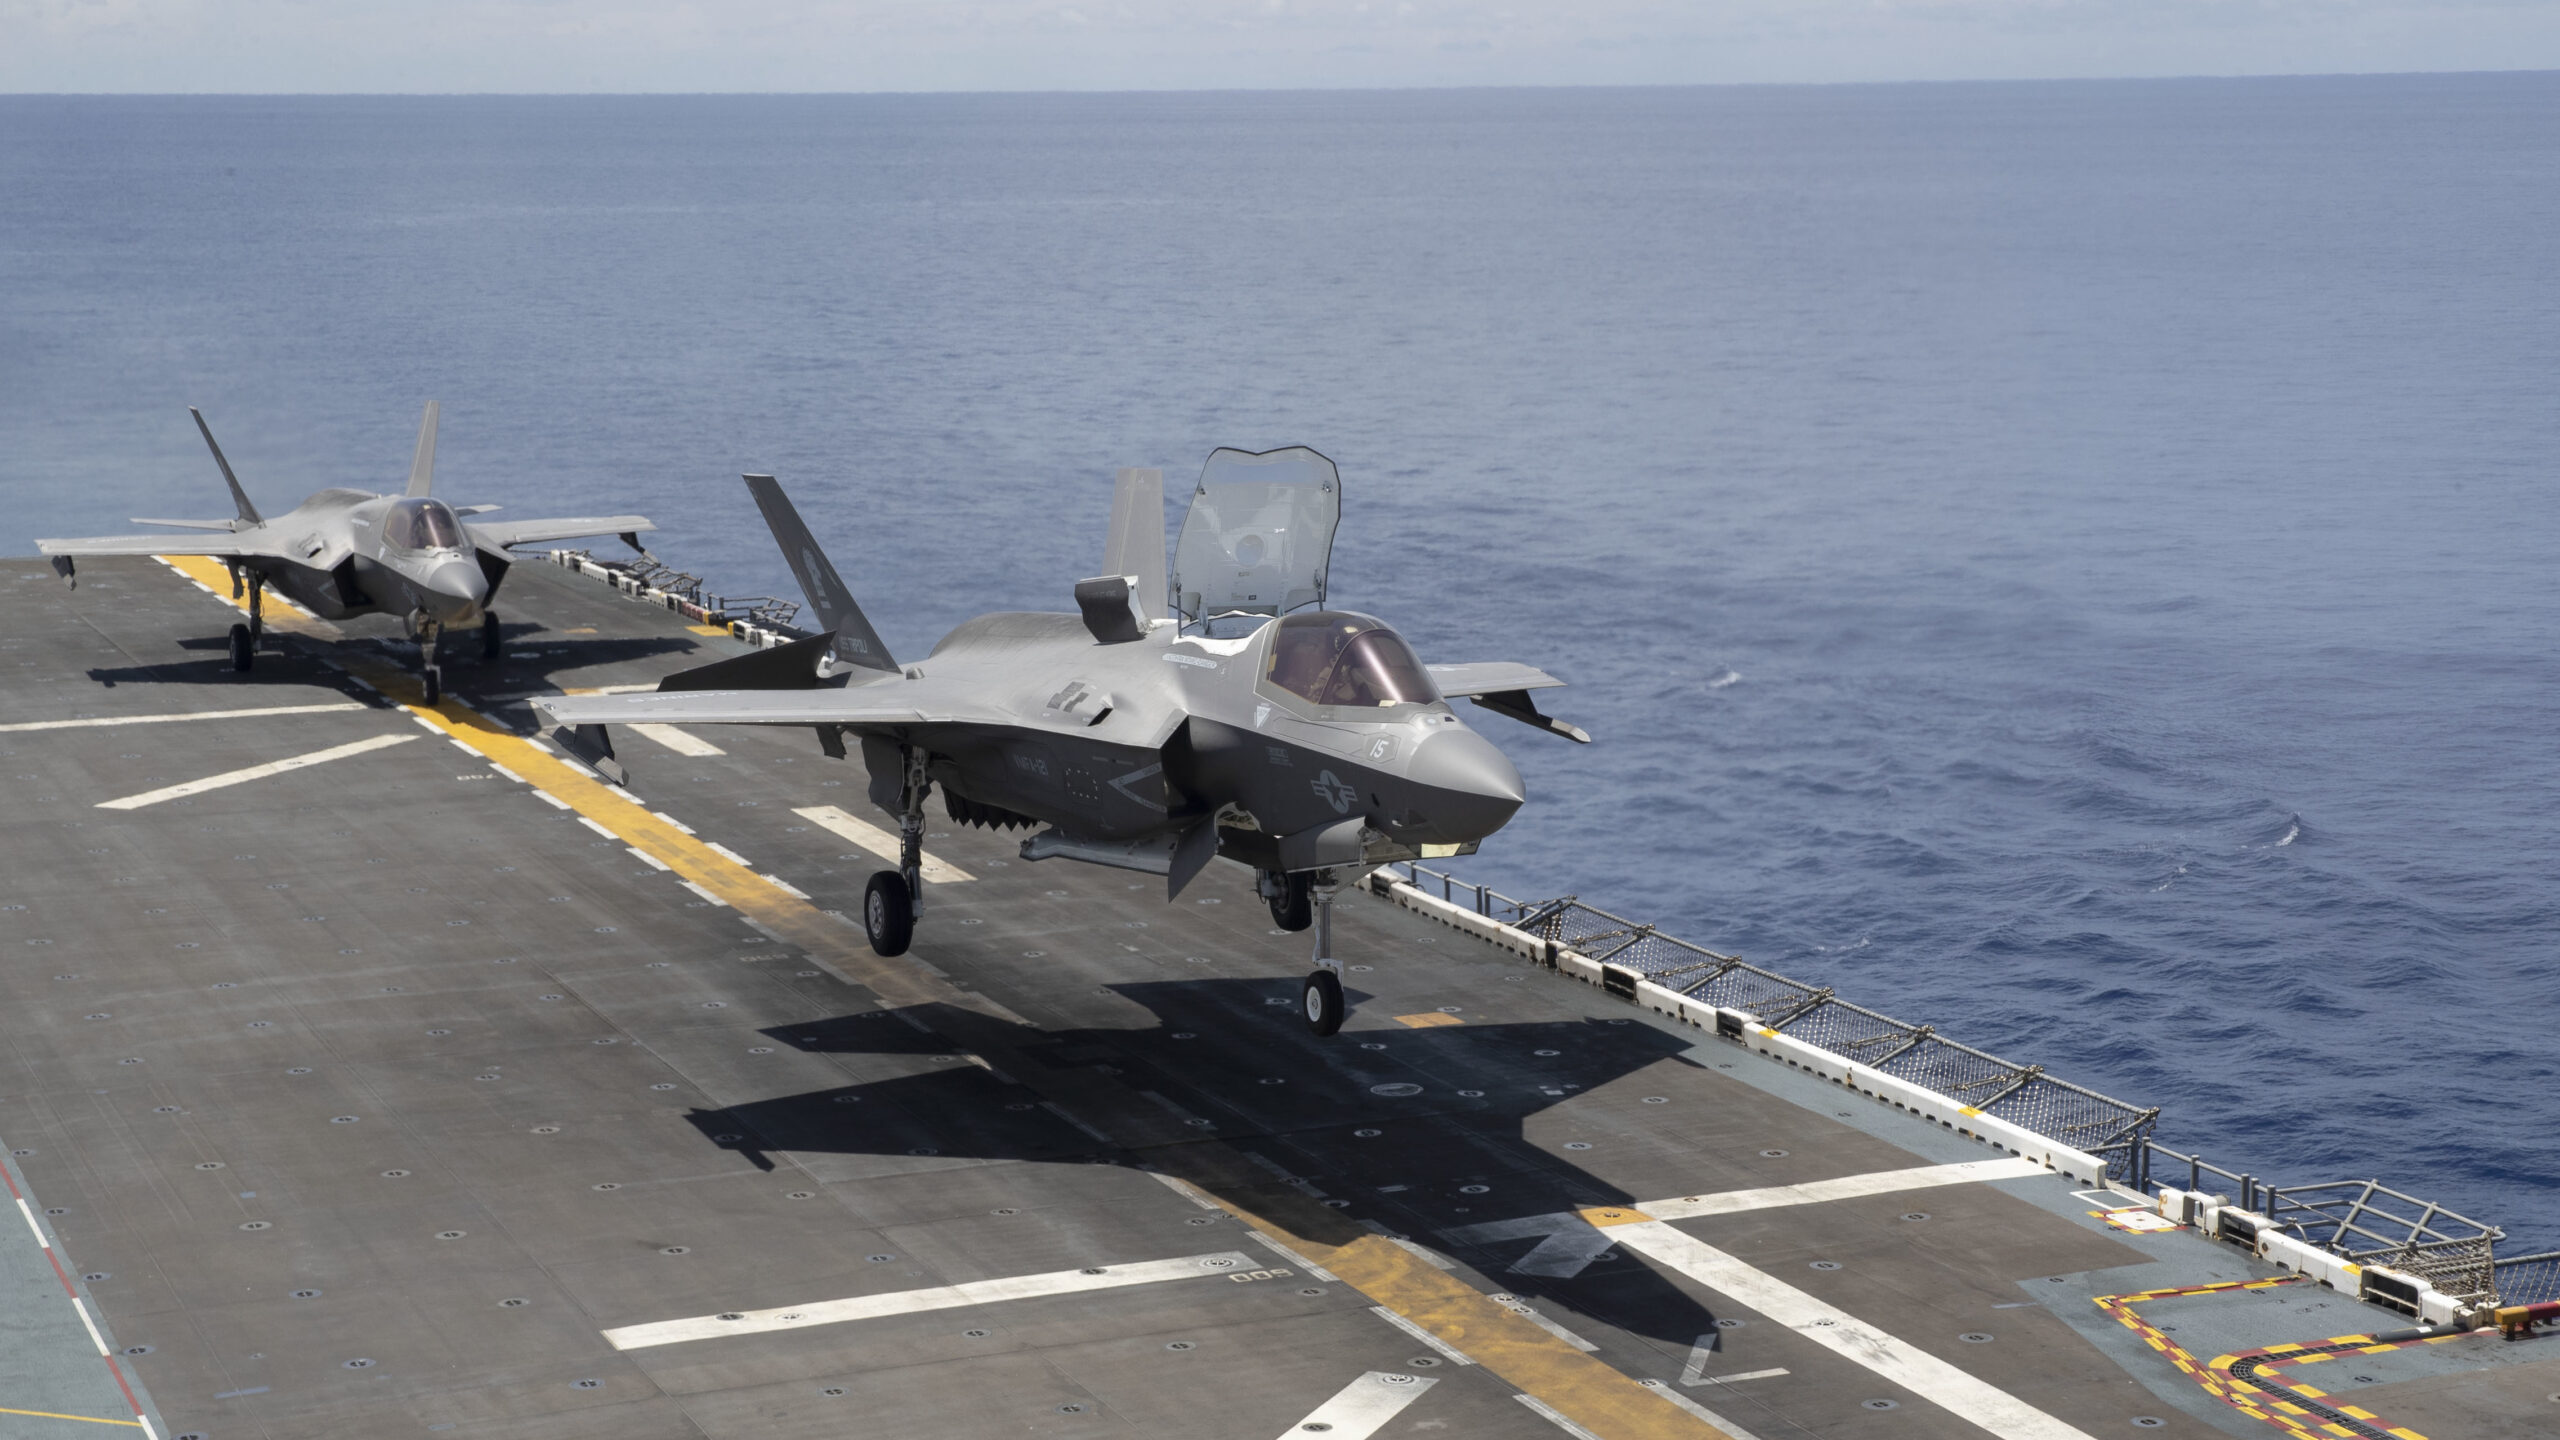 For almost all 100 years of US Navy carrier operations, one company’s aircraft have graced the flight deck